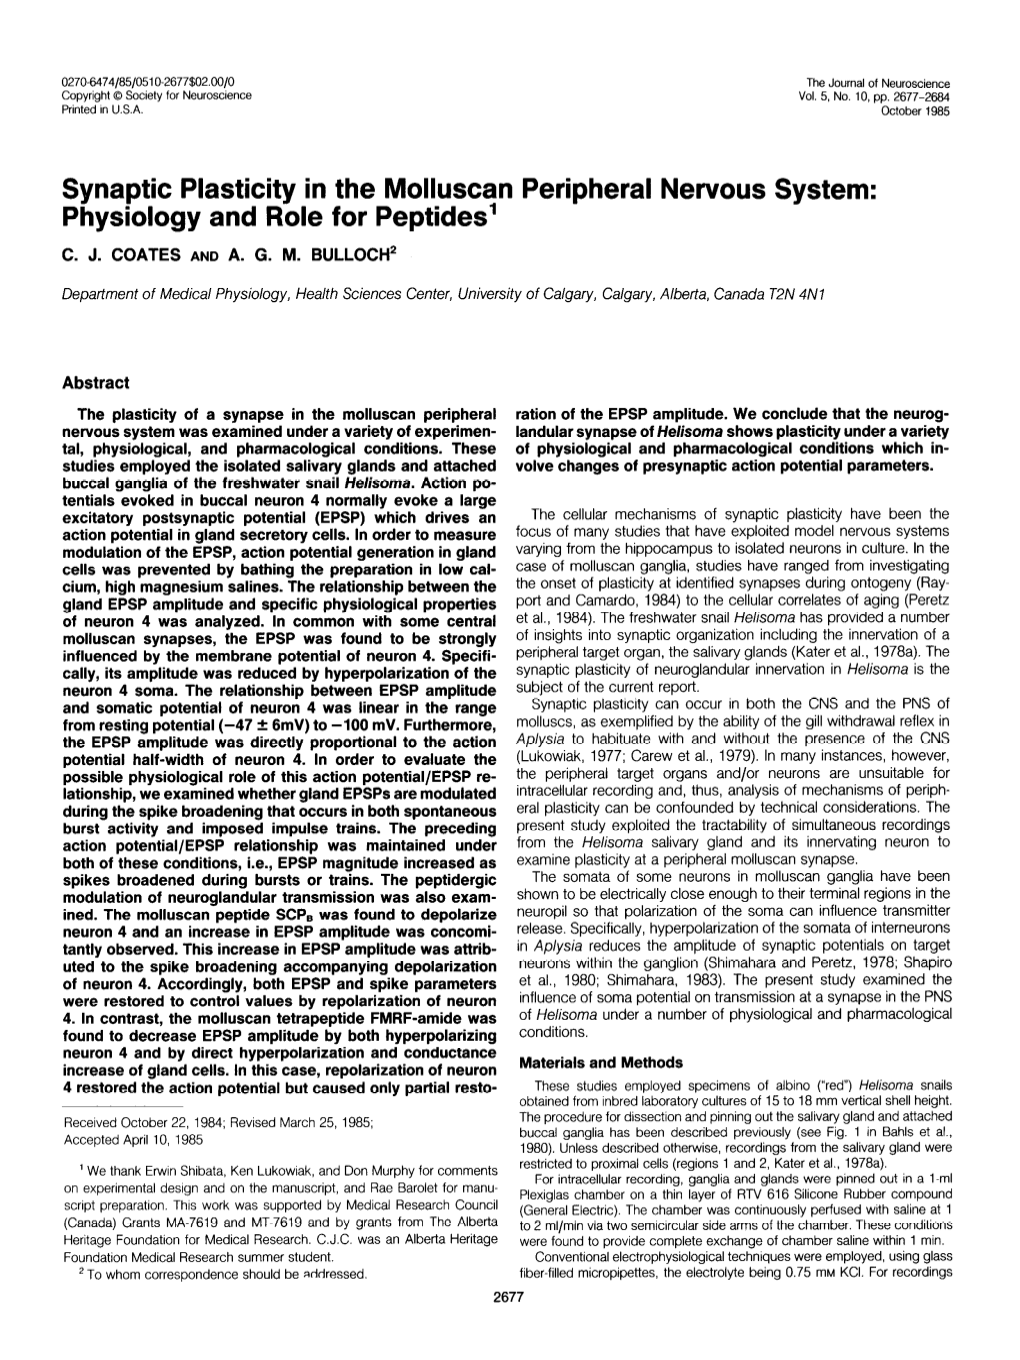 Synaptic Plasticity in the Molluscan Peripheral Nervous System: Physiology and Role for Peptides’